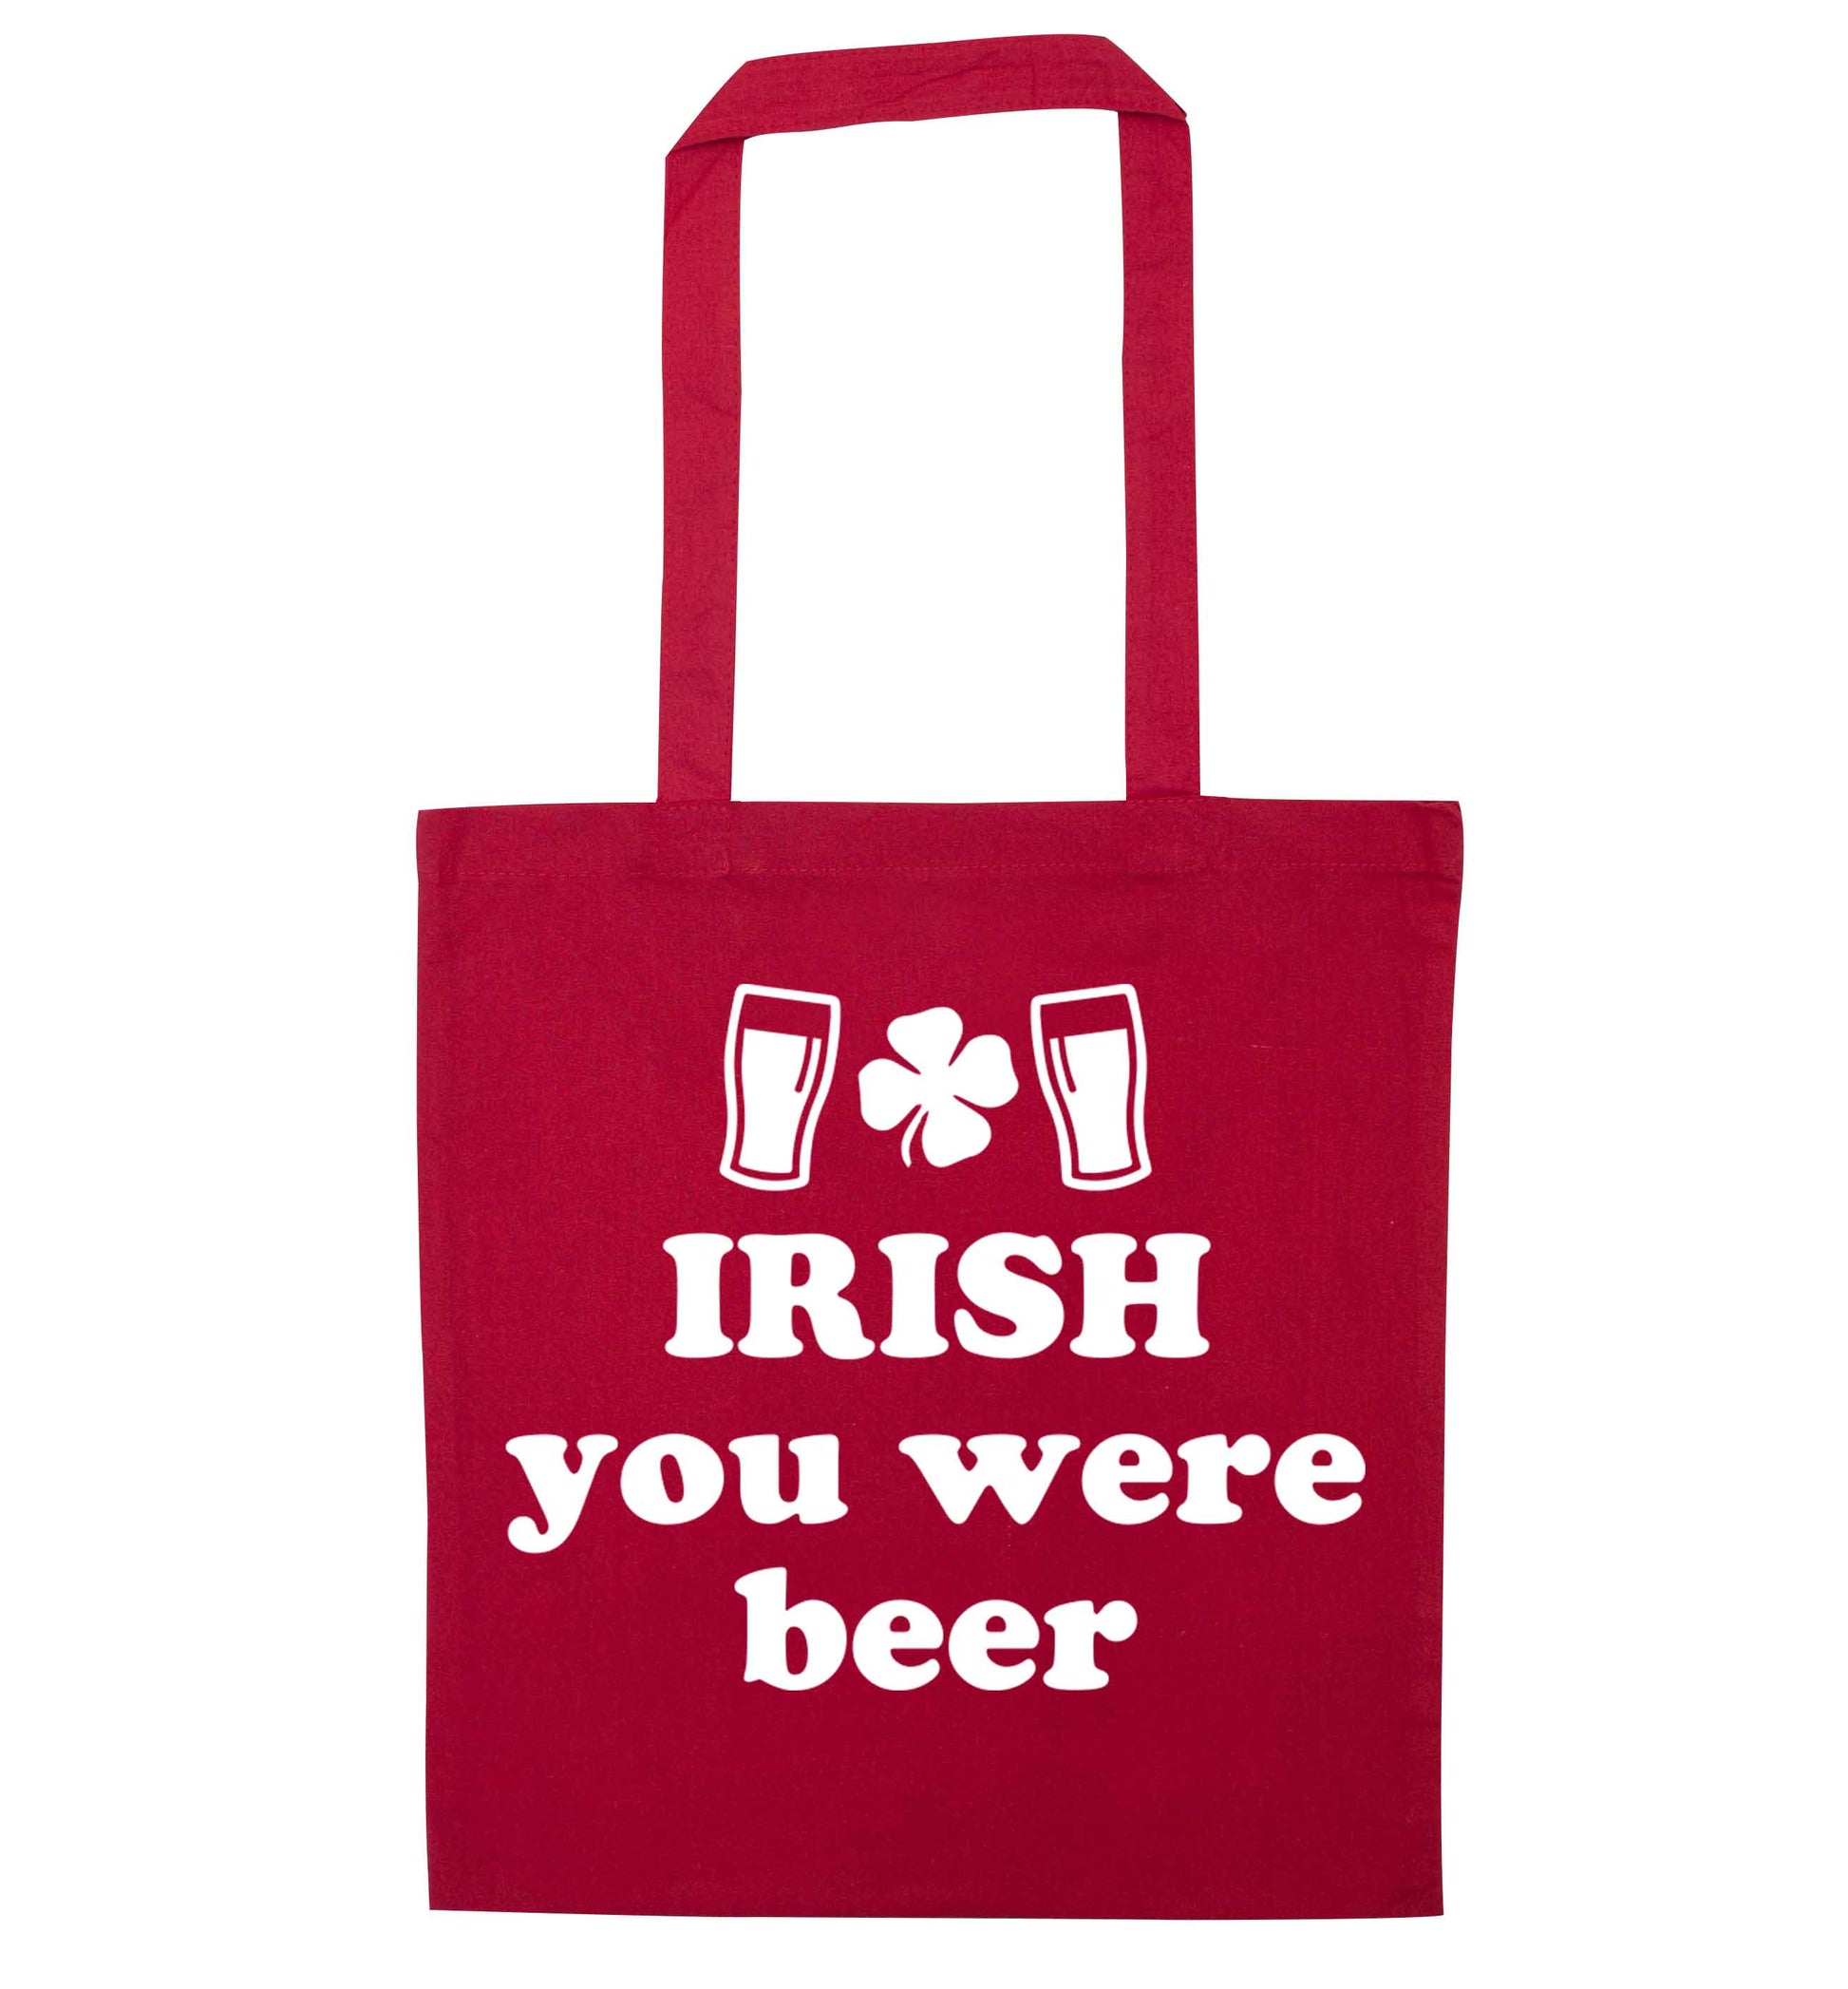 Irish you were beer red tote bag